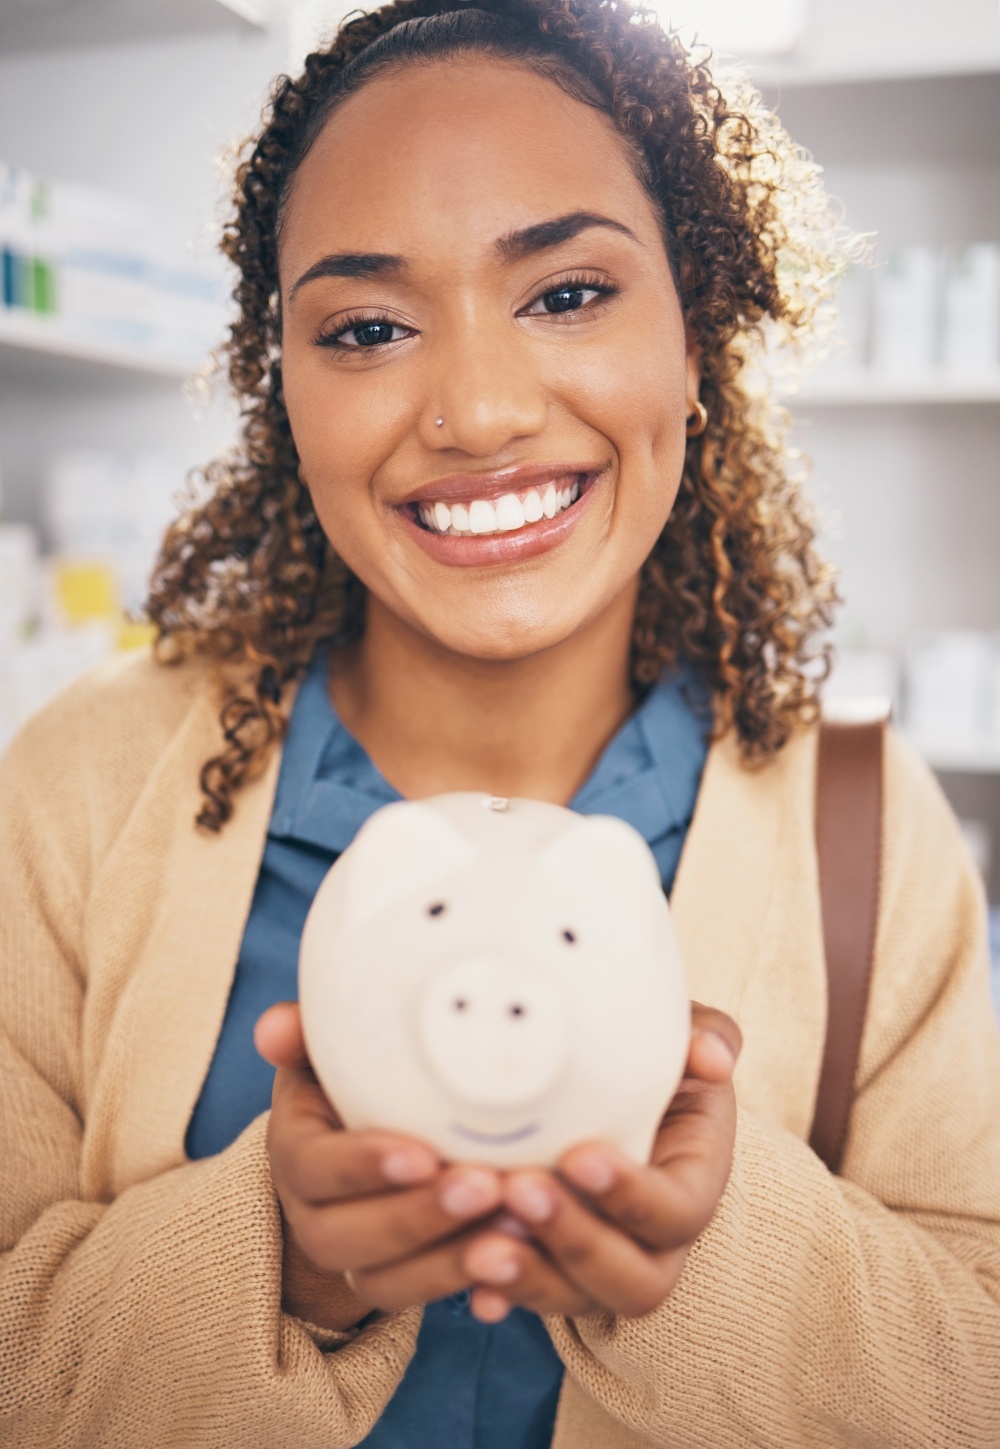 pharmacy-piggy-bank-and-portrait-of-woman-with-sm-2023-11-27-05-18-37-utc